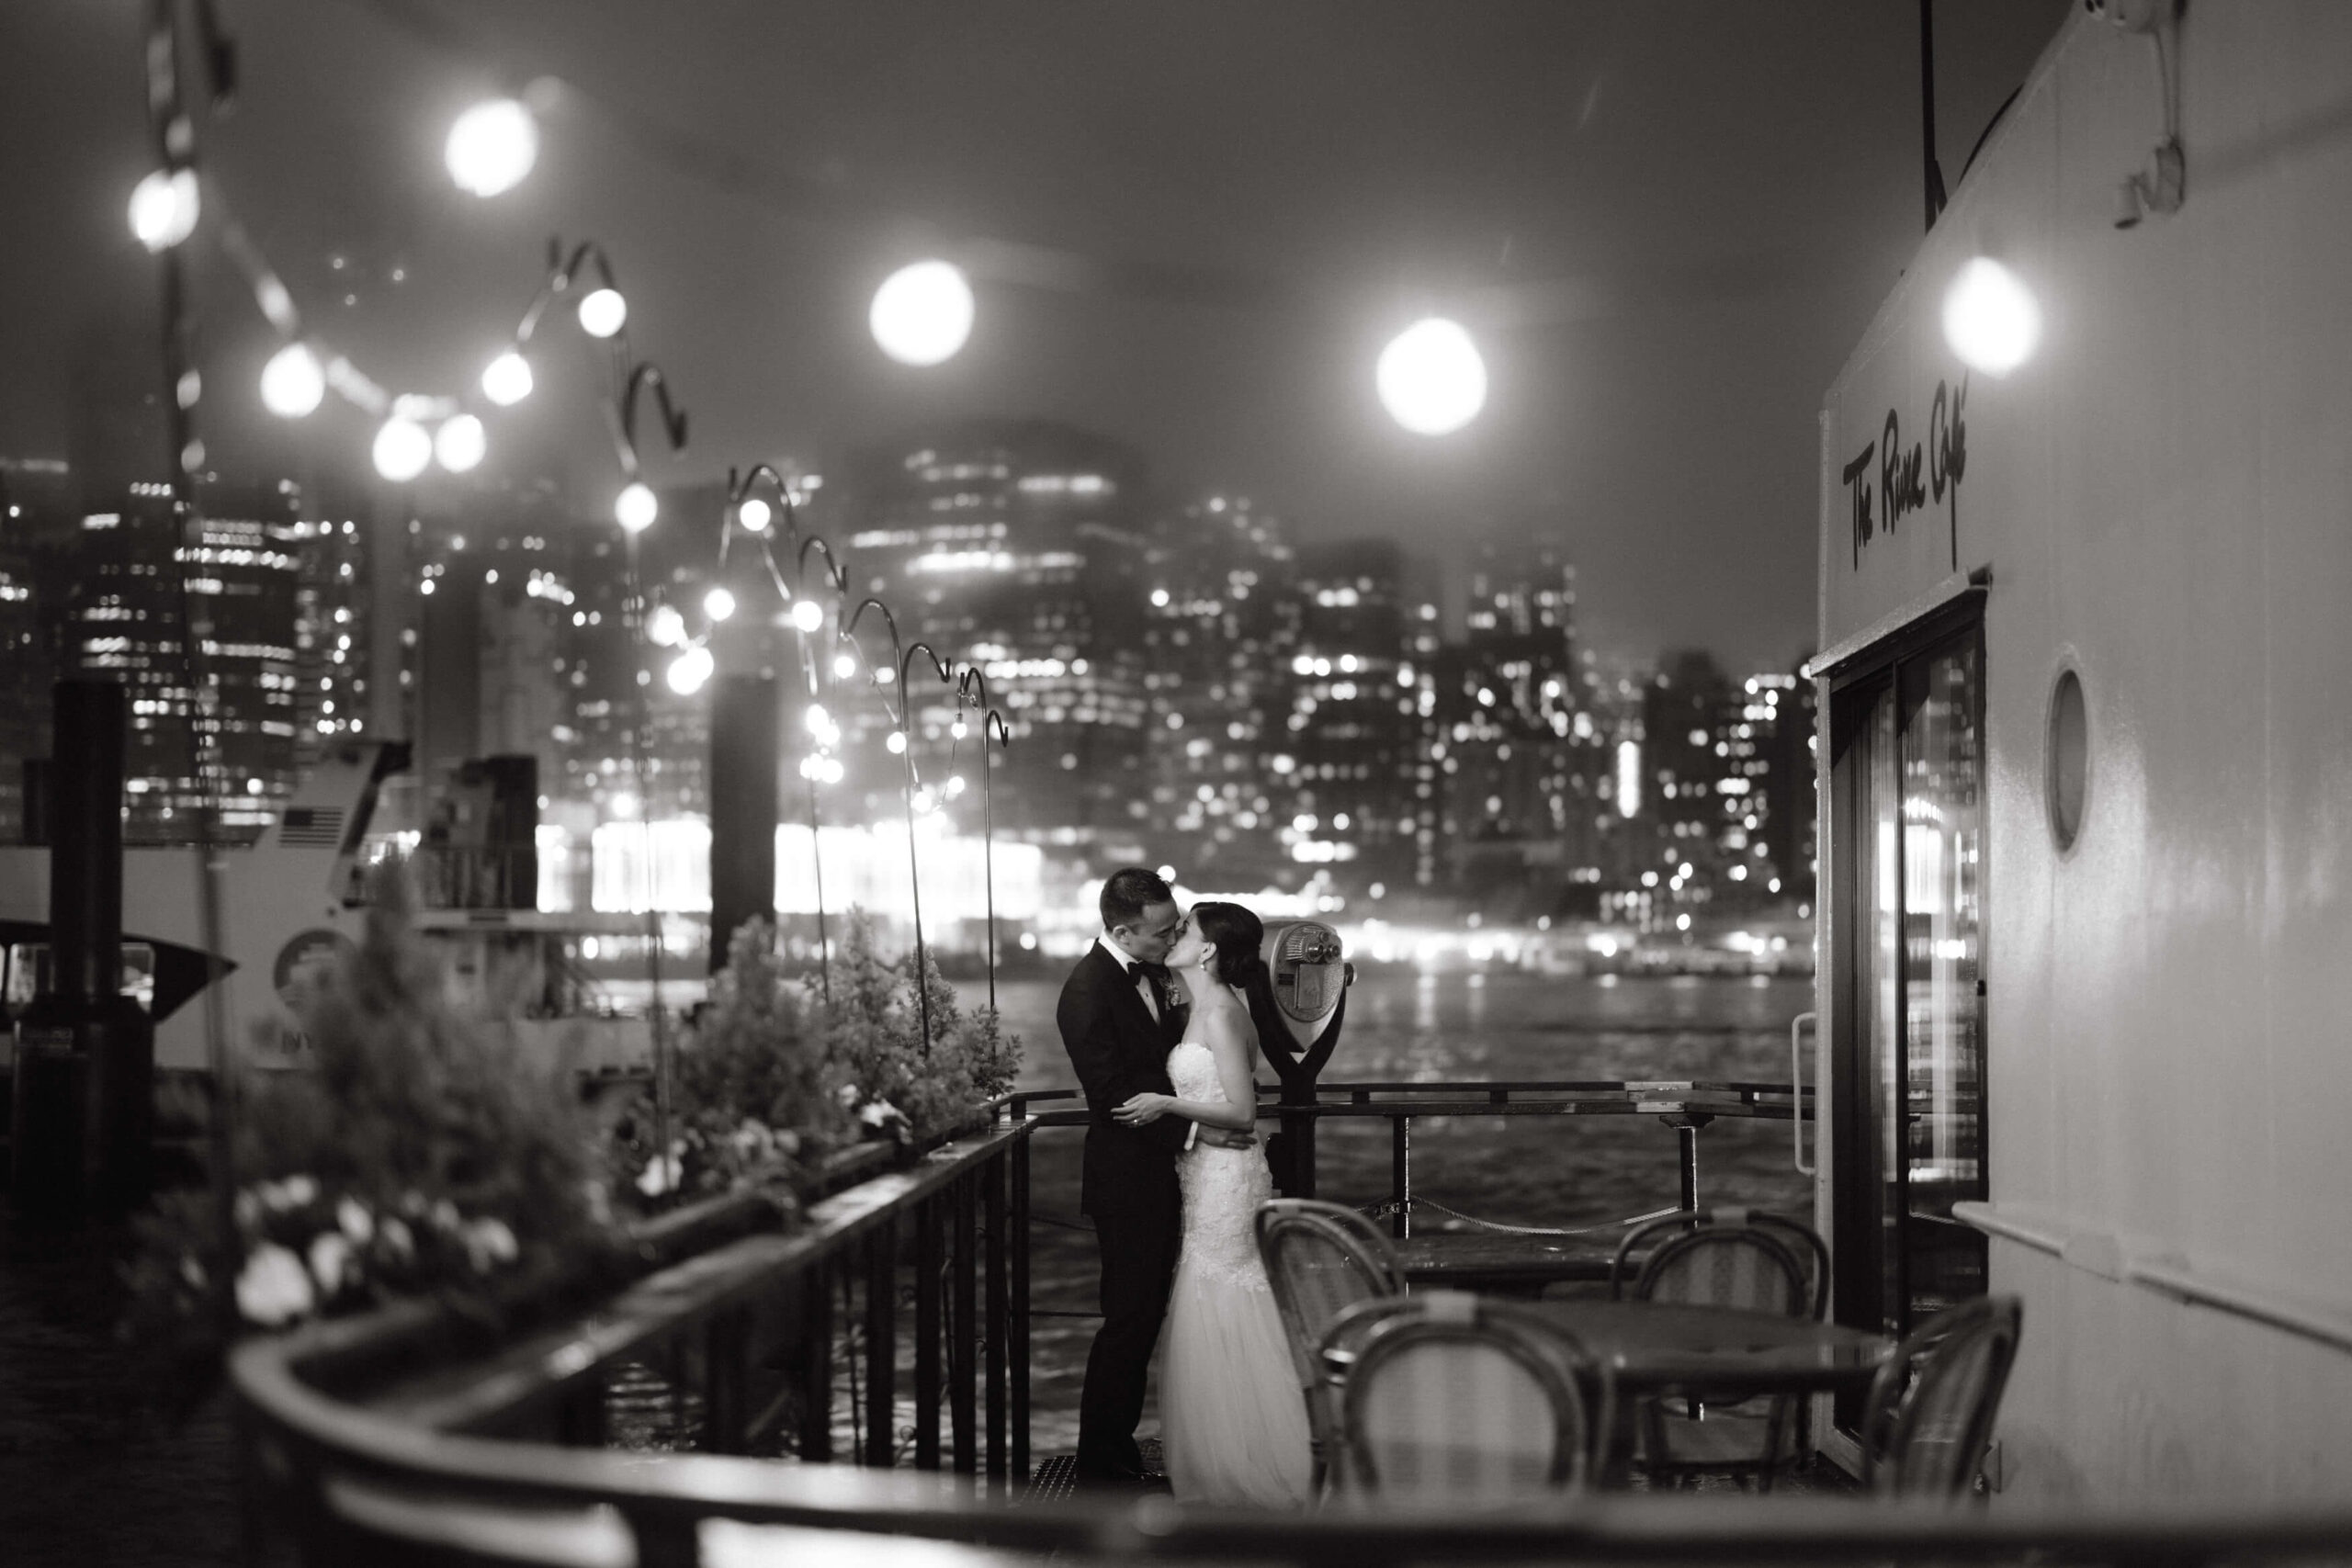 Black and white editorial image of the newlyweds kissing at The River Cafe, NYC. Intimate wedding image by Jenny Fu Studio